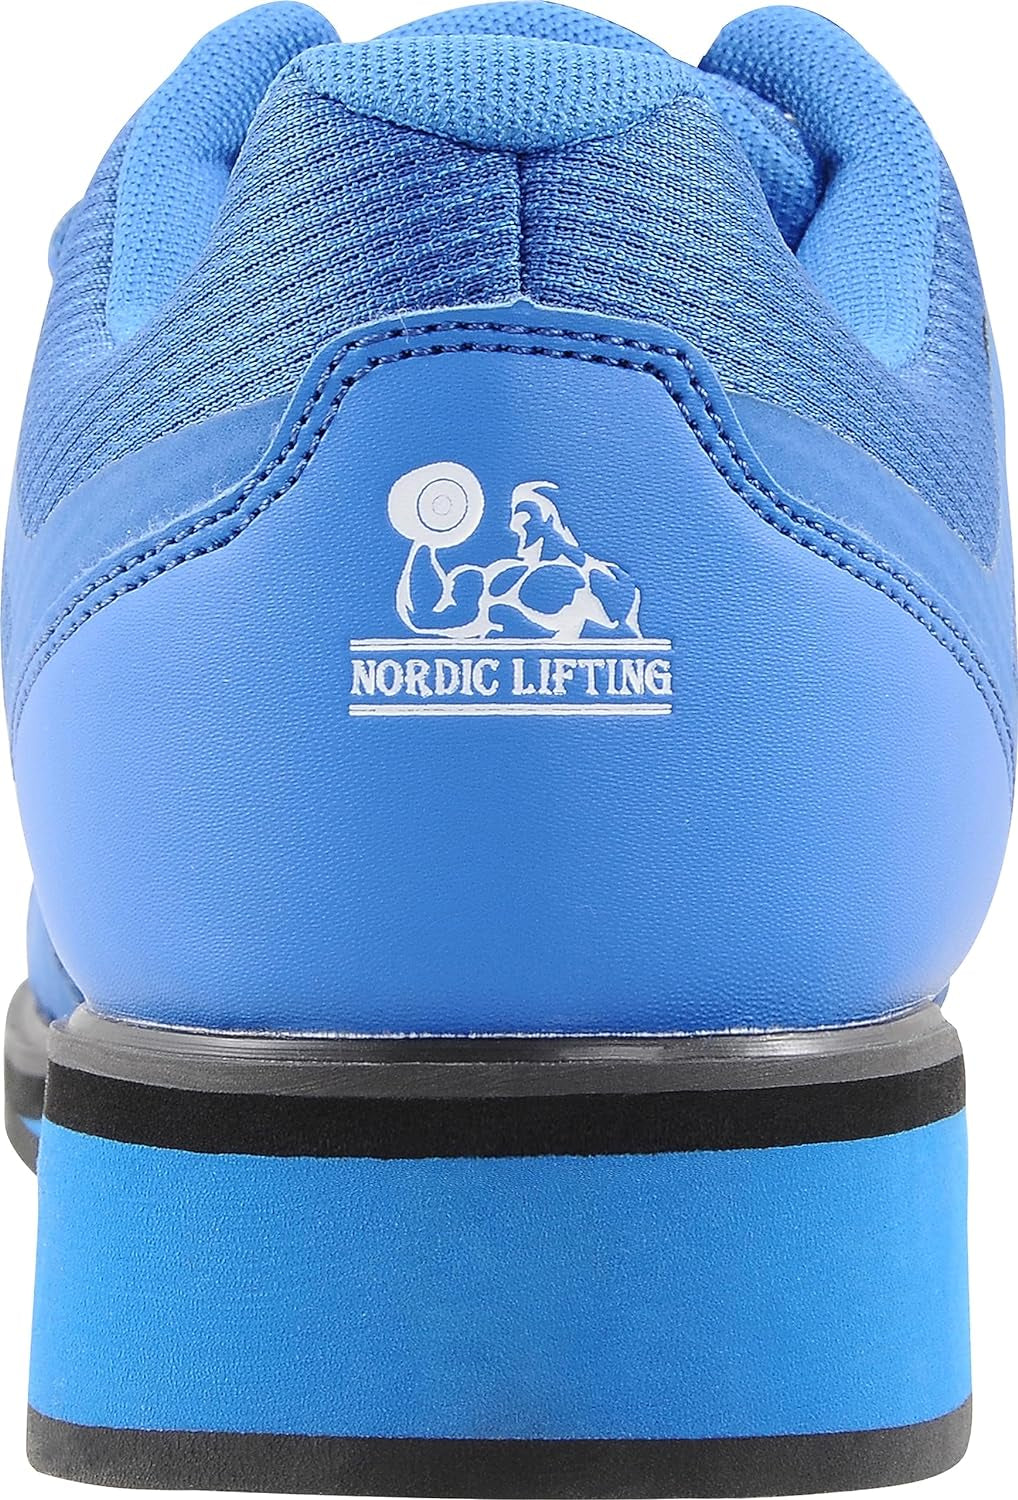 Powerlifting Shoes for Heavy Weightlifting - Men'S Squat Shoe - MEGIN